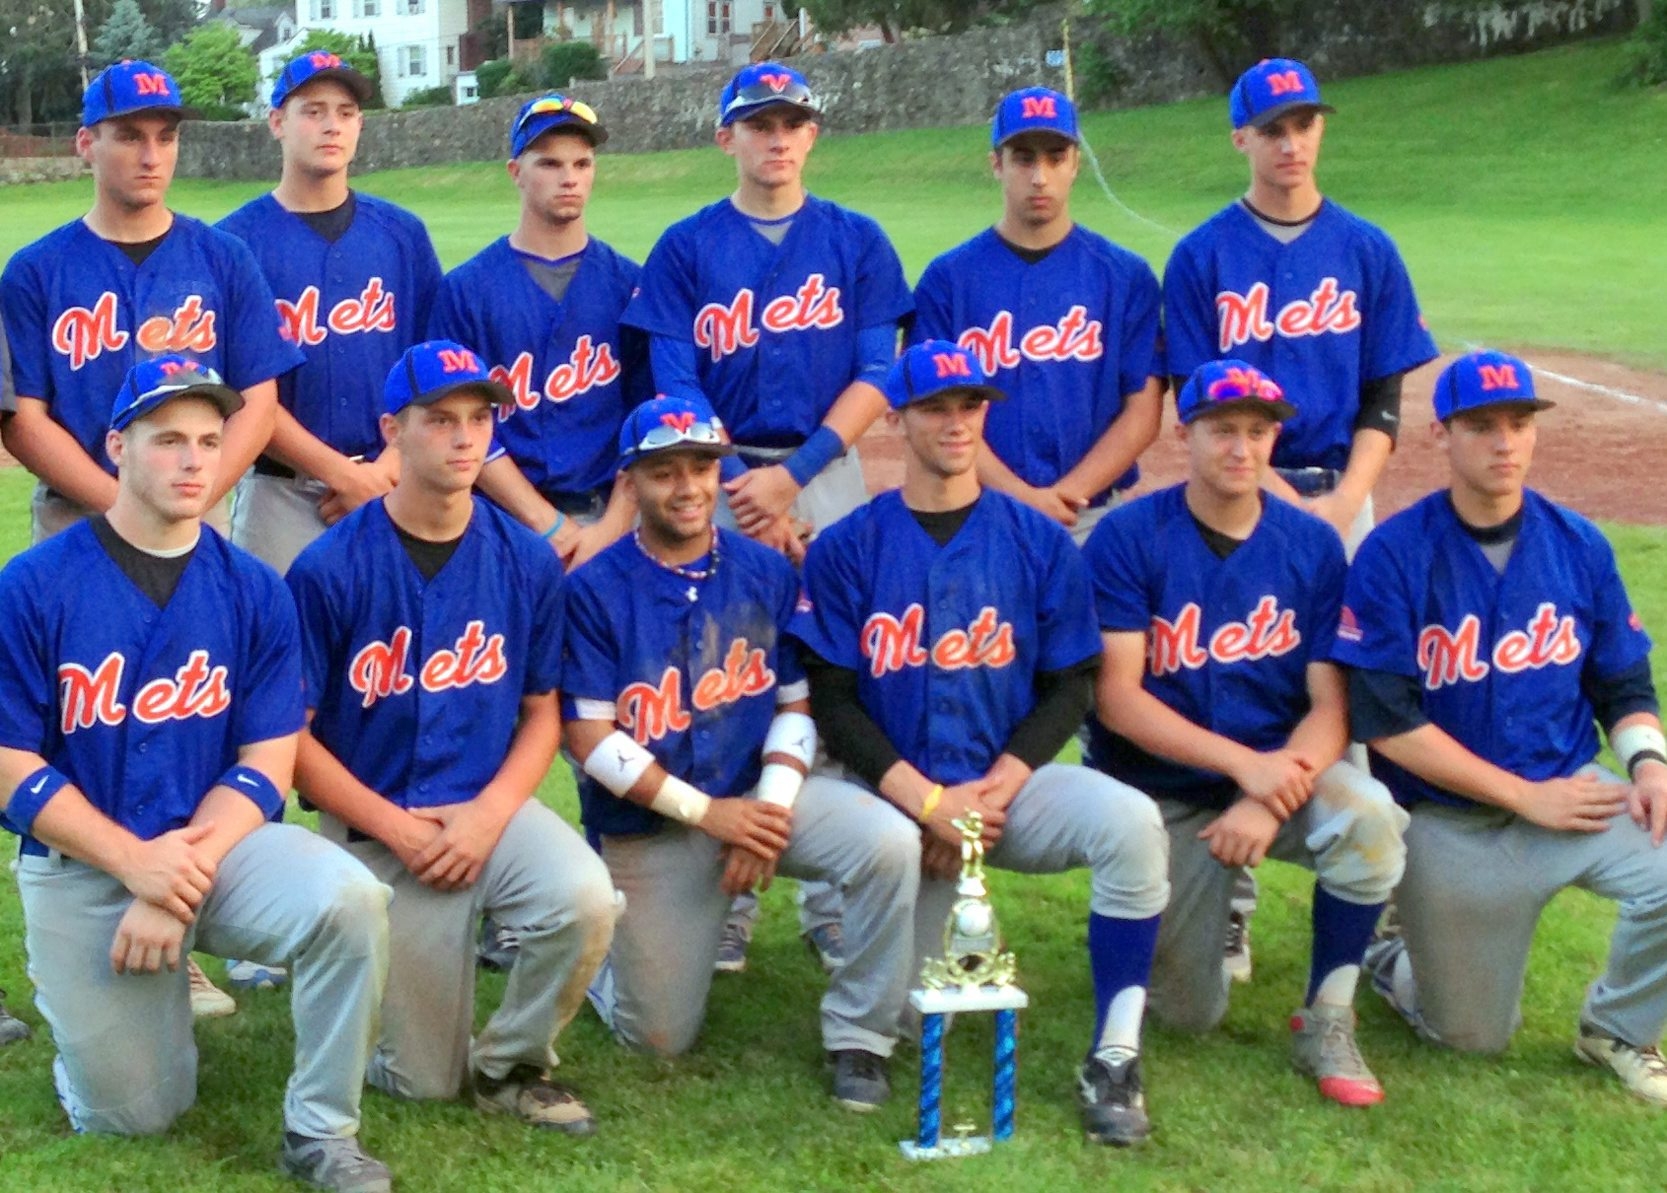 The Moosic Mets U17 baseball team won the Battle at the Border in Port 1667x1193